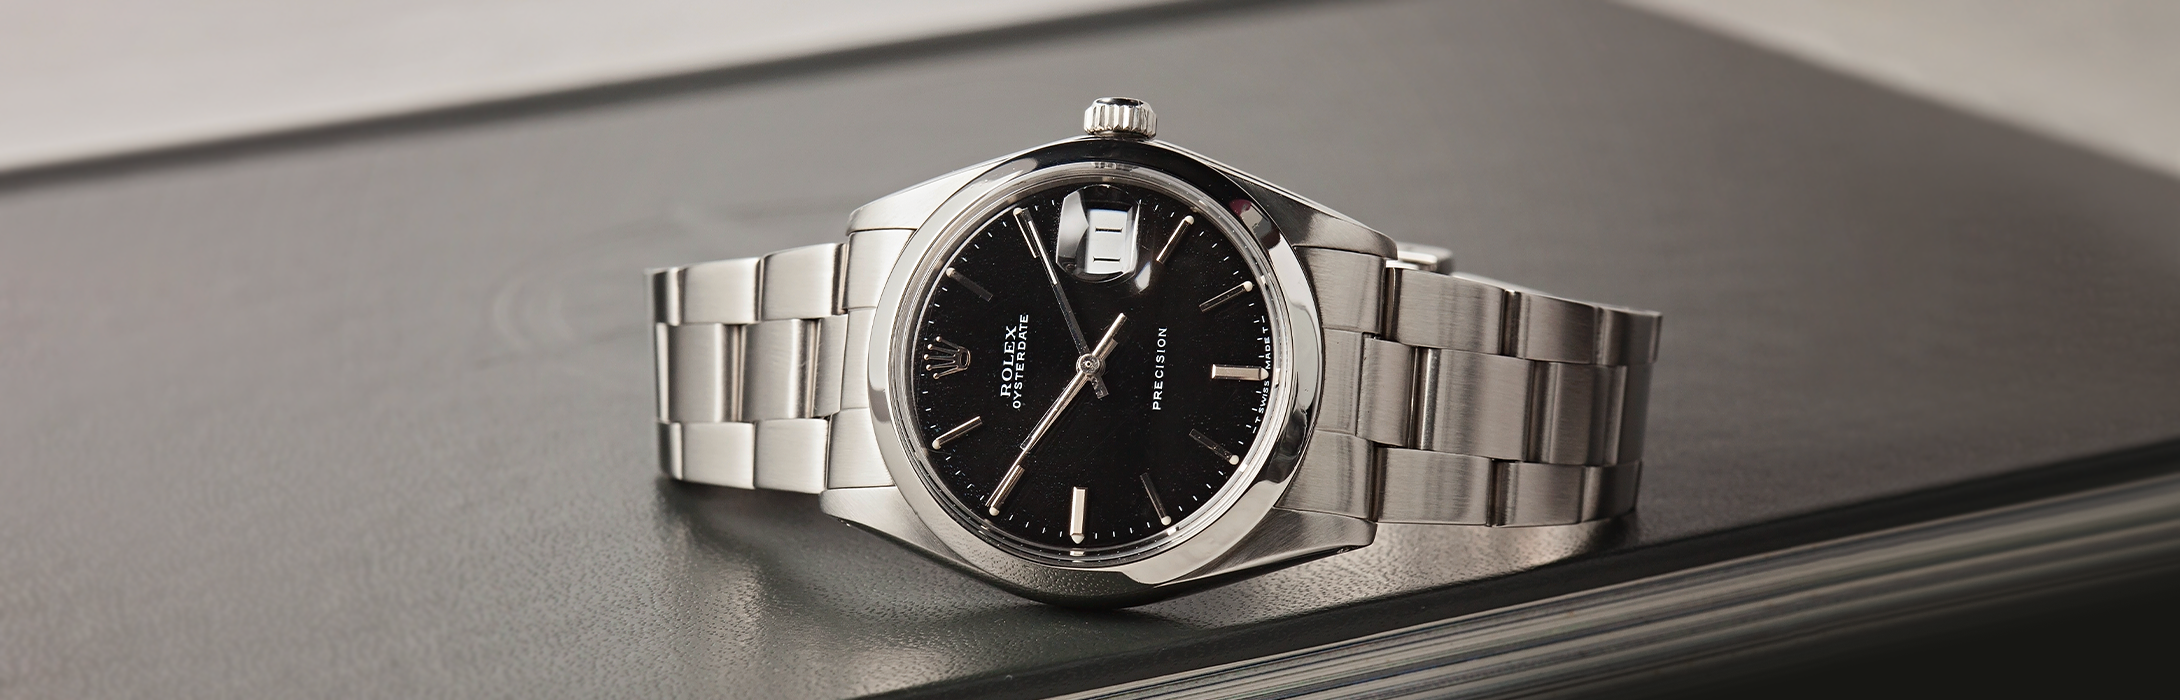 Rolex Oysterdate Precision 6694 Ultimate Buying Guide